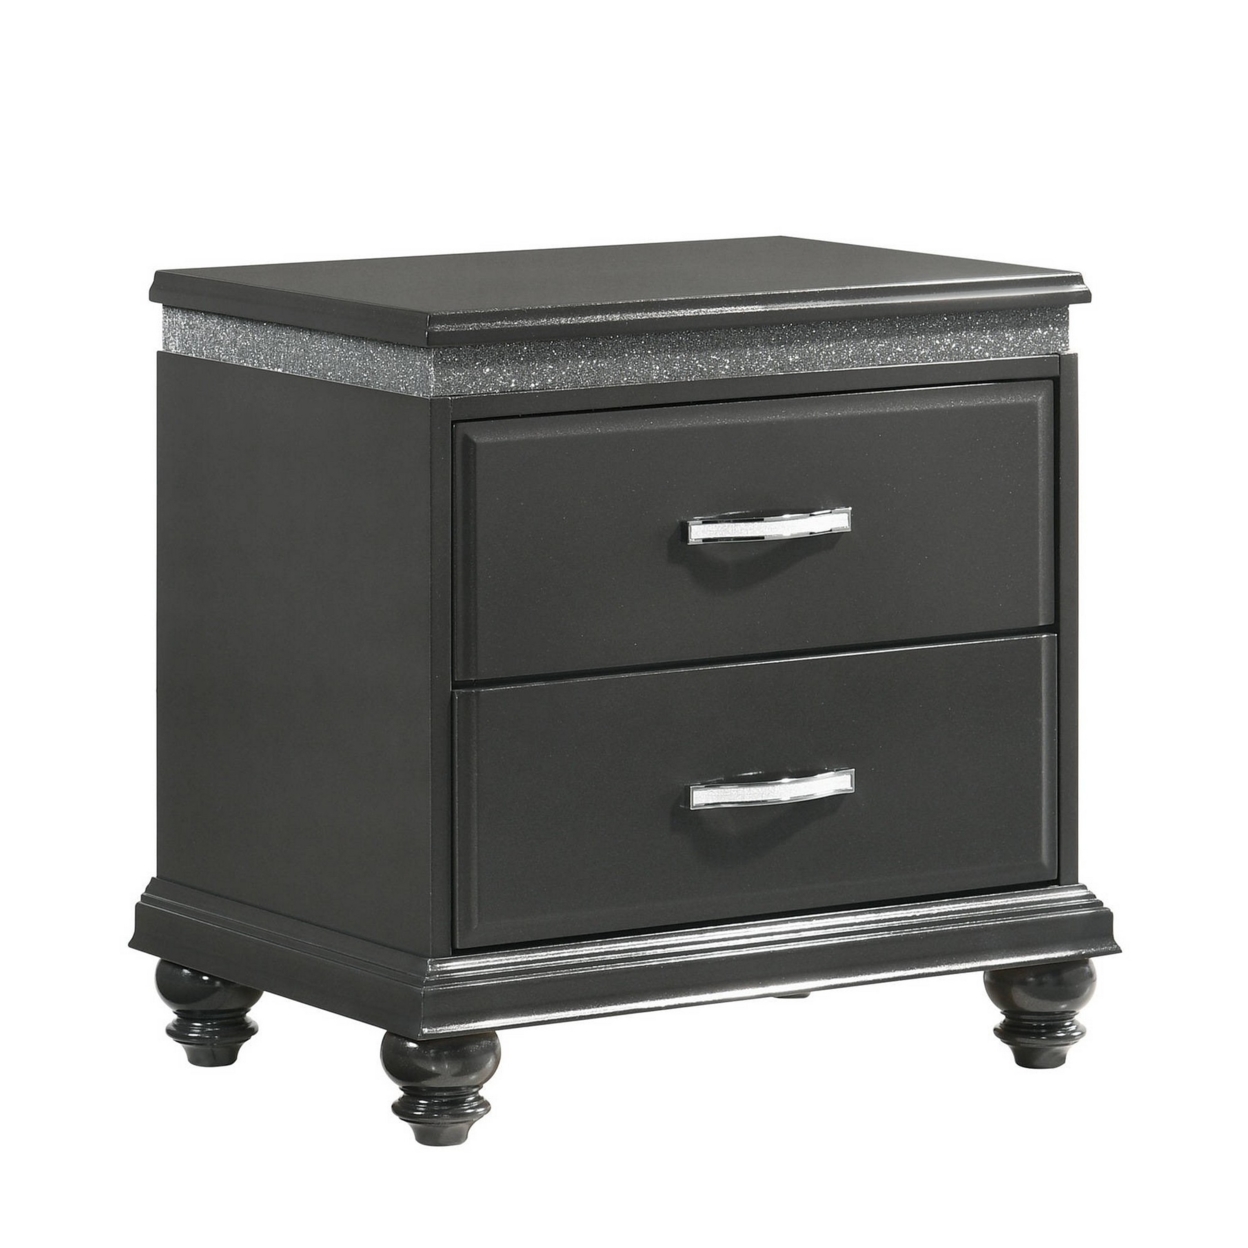 Nightstand With Crystal Like Knobs And Accents, Gray- Saltoro Sherpi